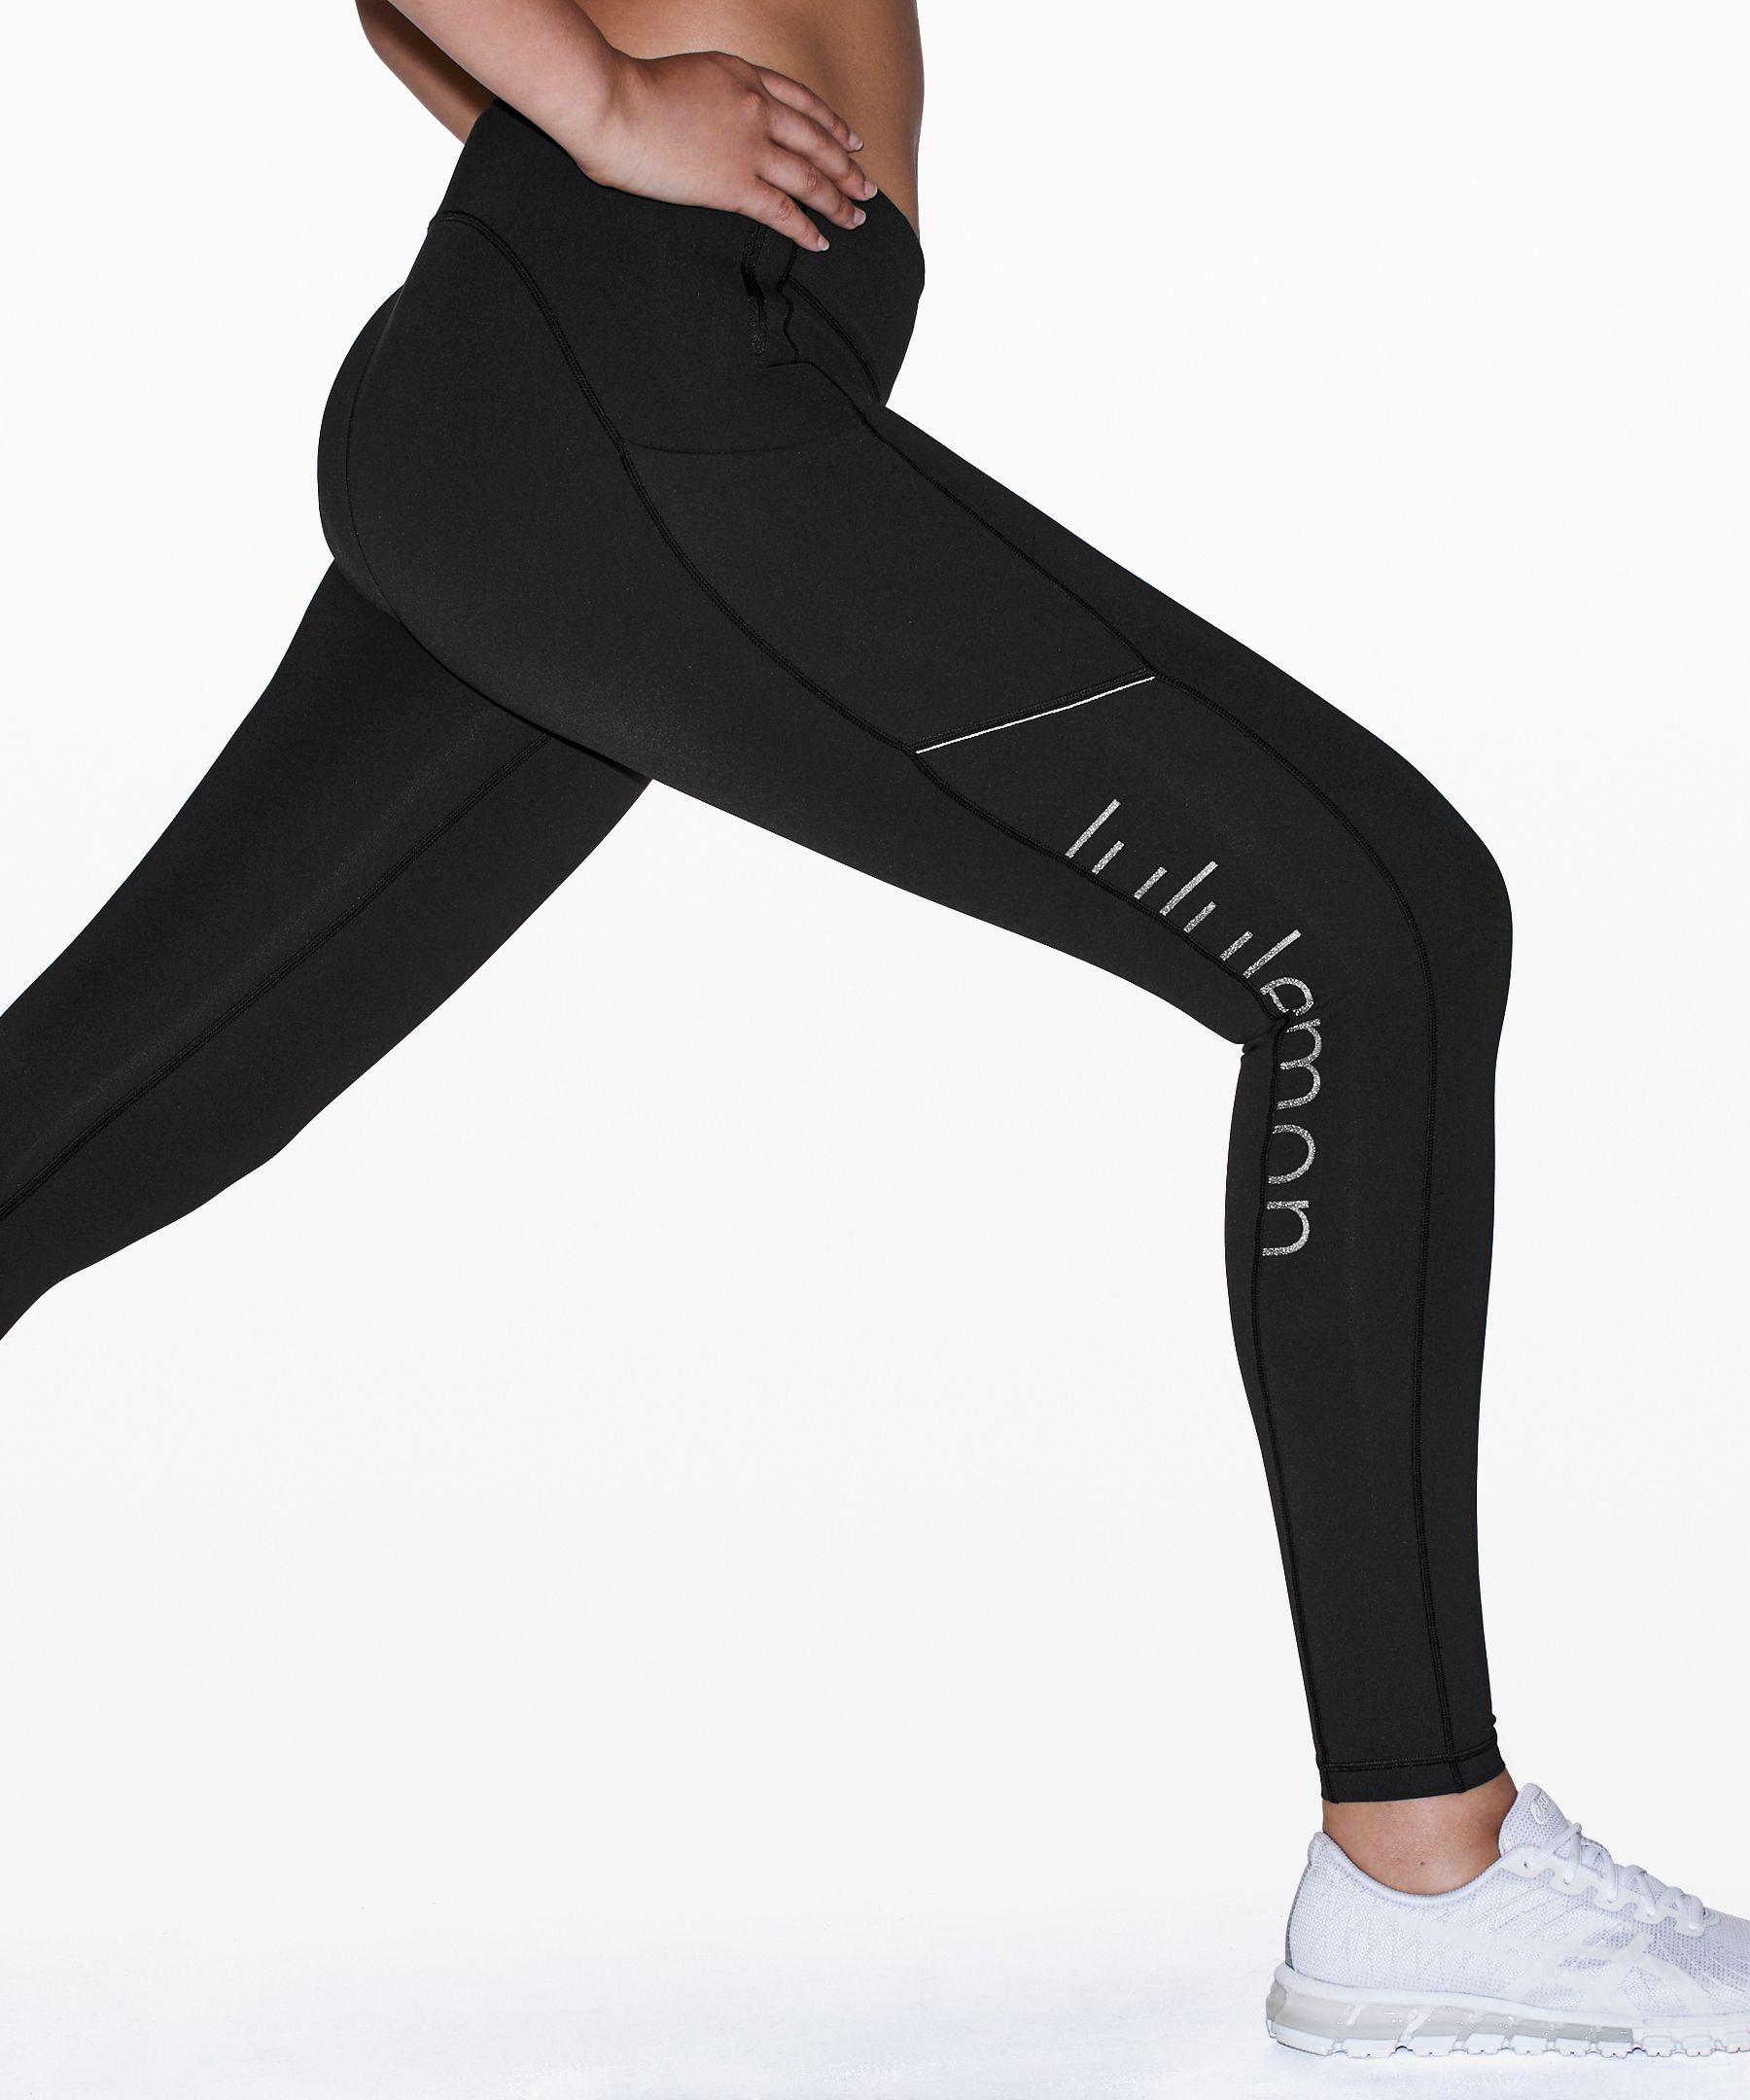 NEW LULULEMON Speed Up 28 Tight ~SIZE:0,4,6~ ARFO AIR FORCE